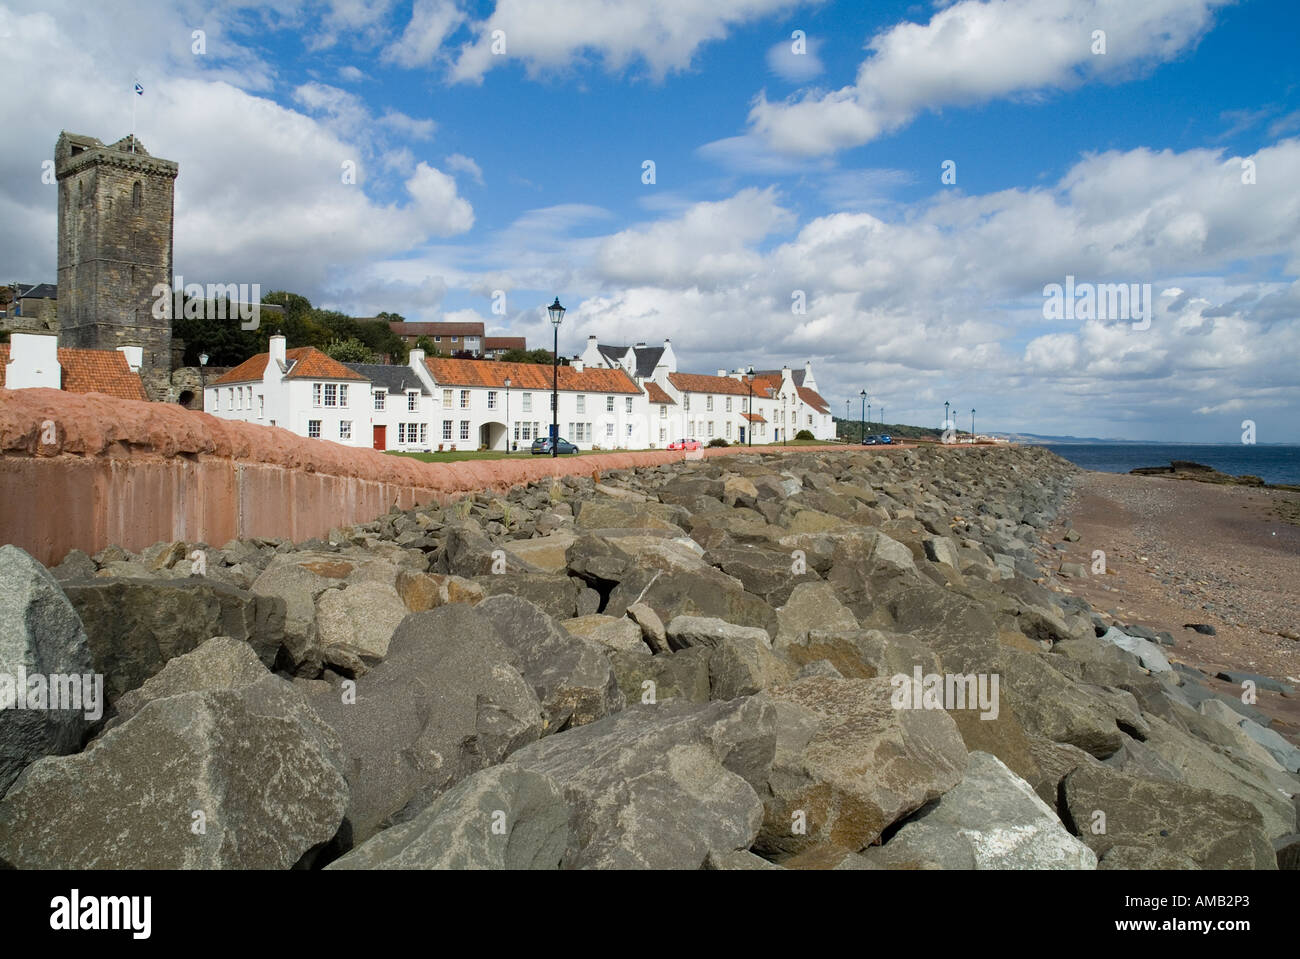 dh  DYSART FIFE Sea defence barriers St Serfs tower and white house at seafront village scotland construction Stock Photo